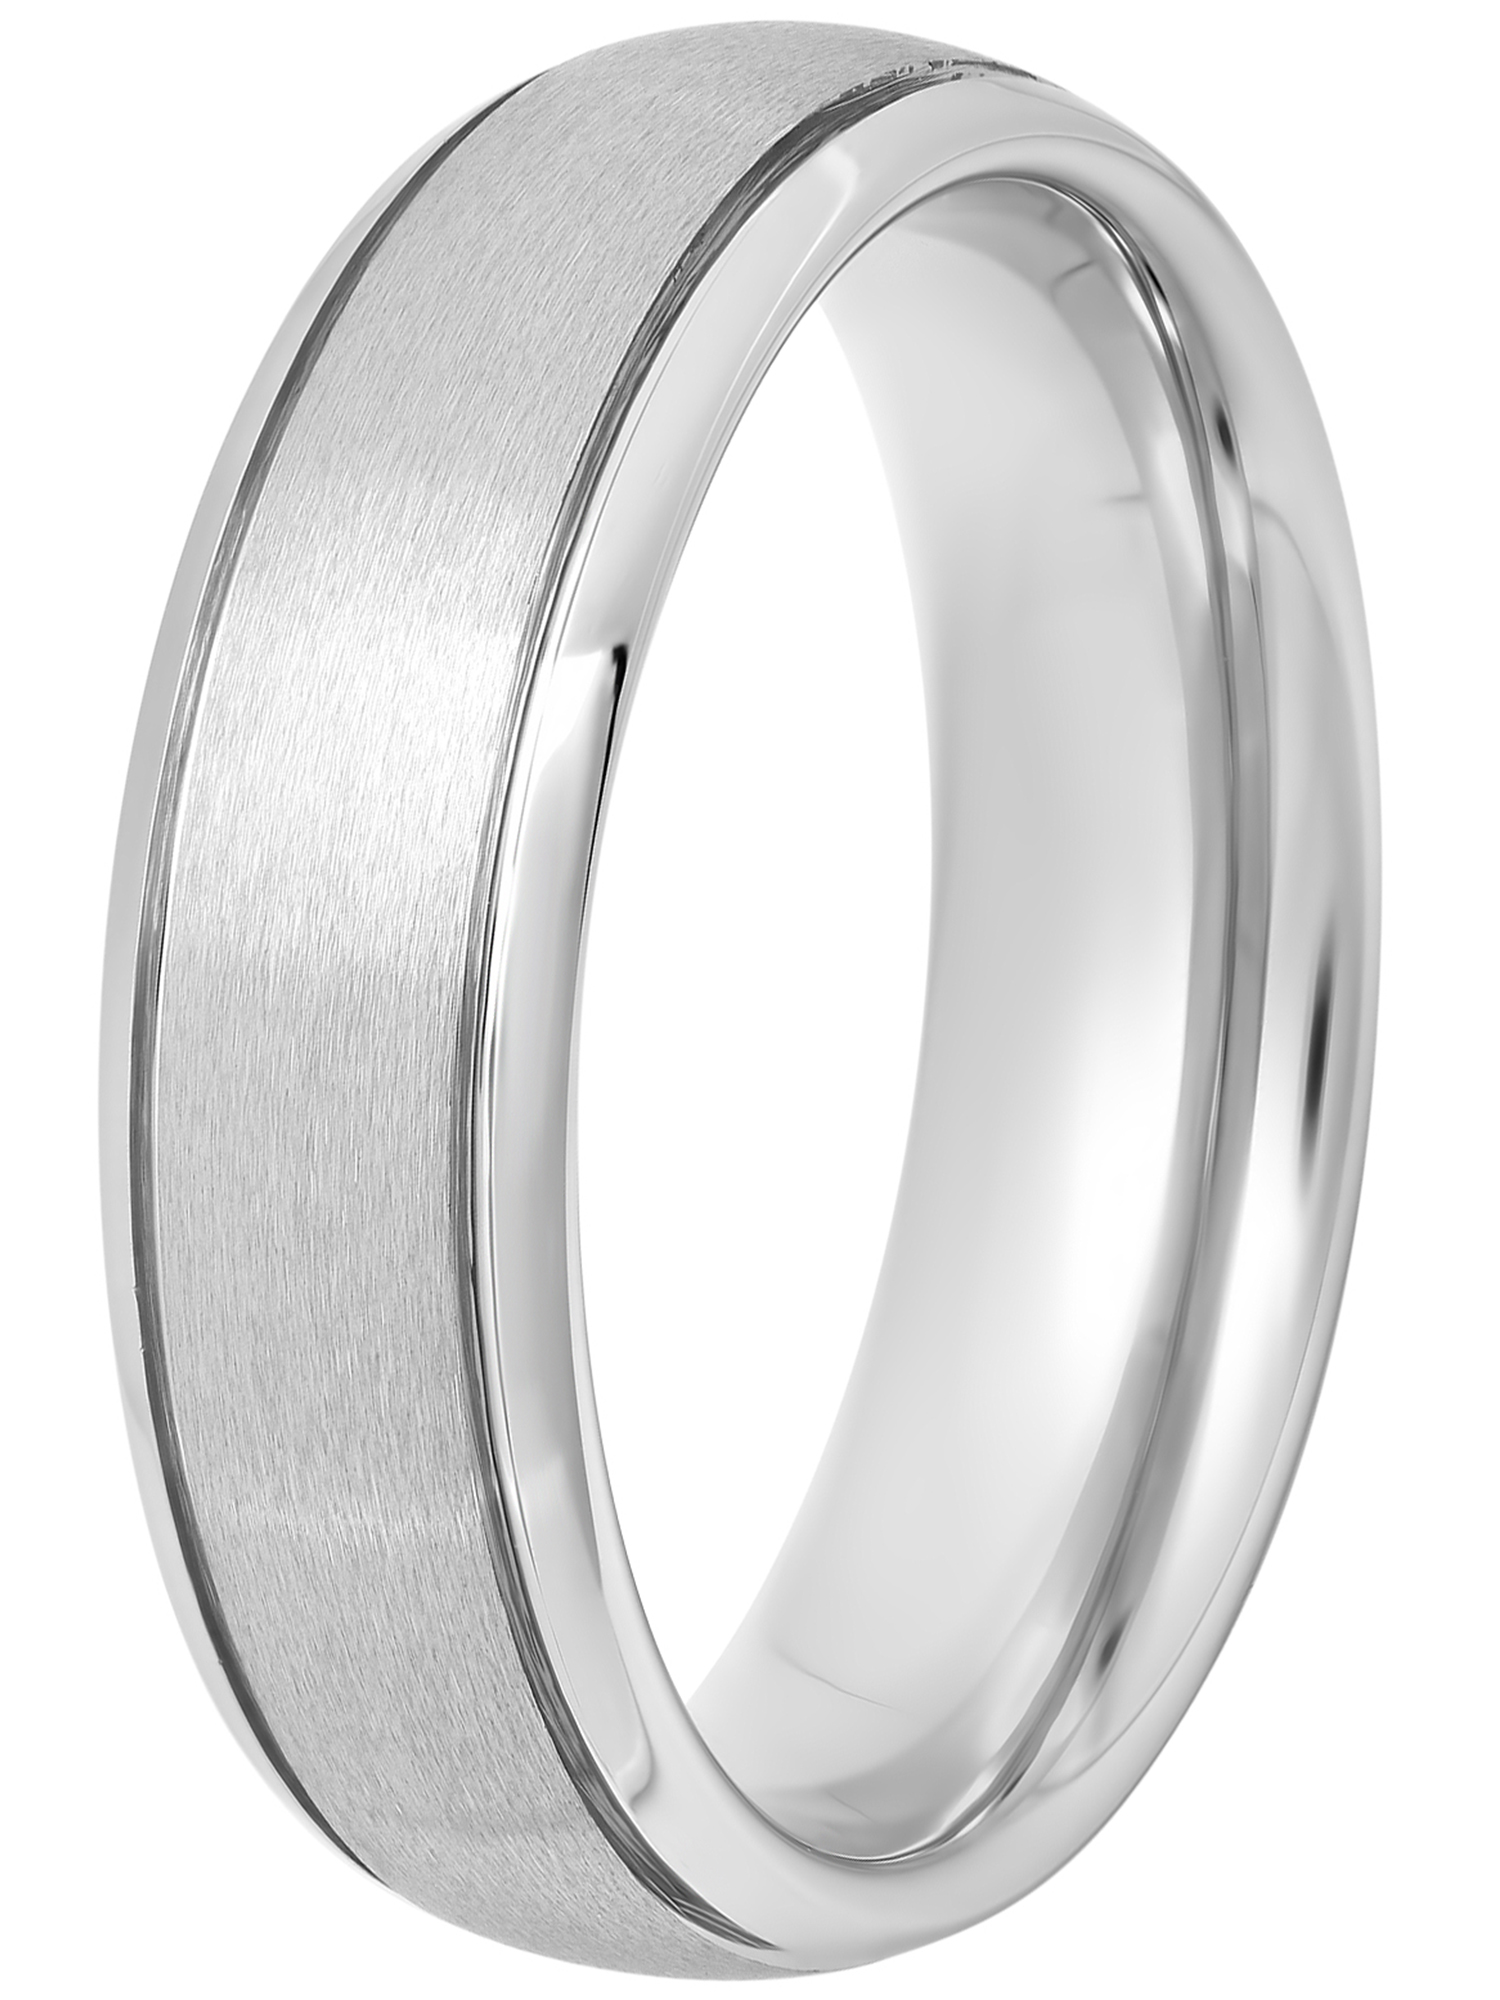 Men's Tungsten 6MM Grooved Satin Wedding Band - Men's Ring - image 1 of 5